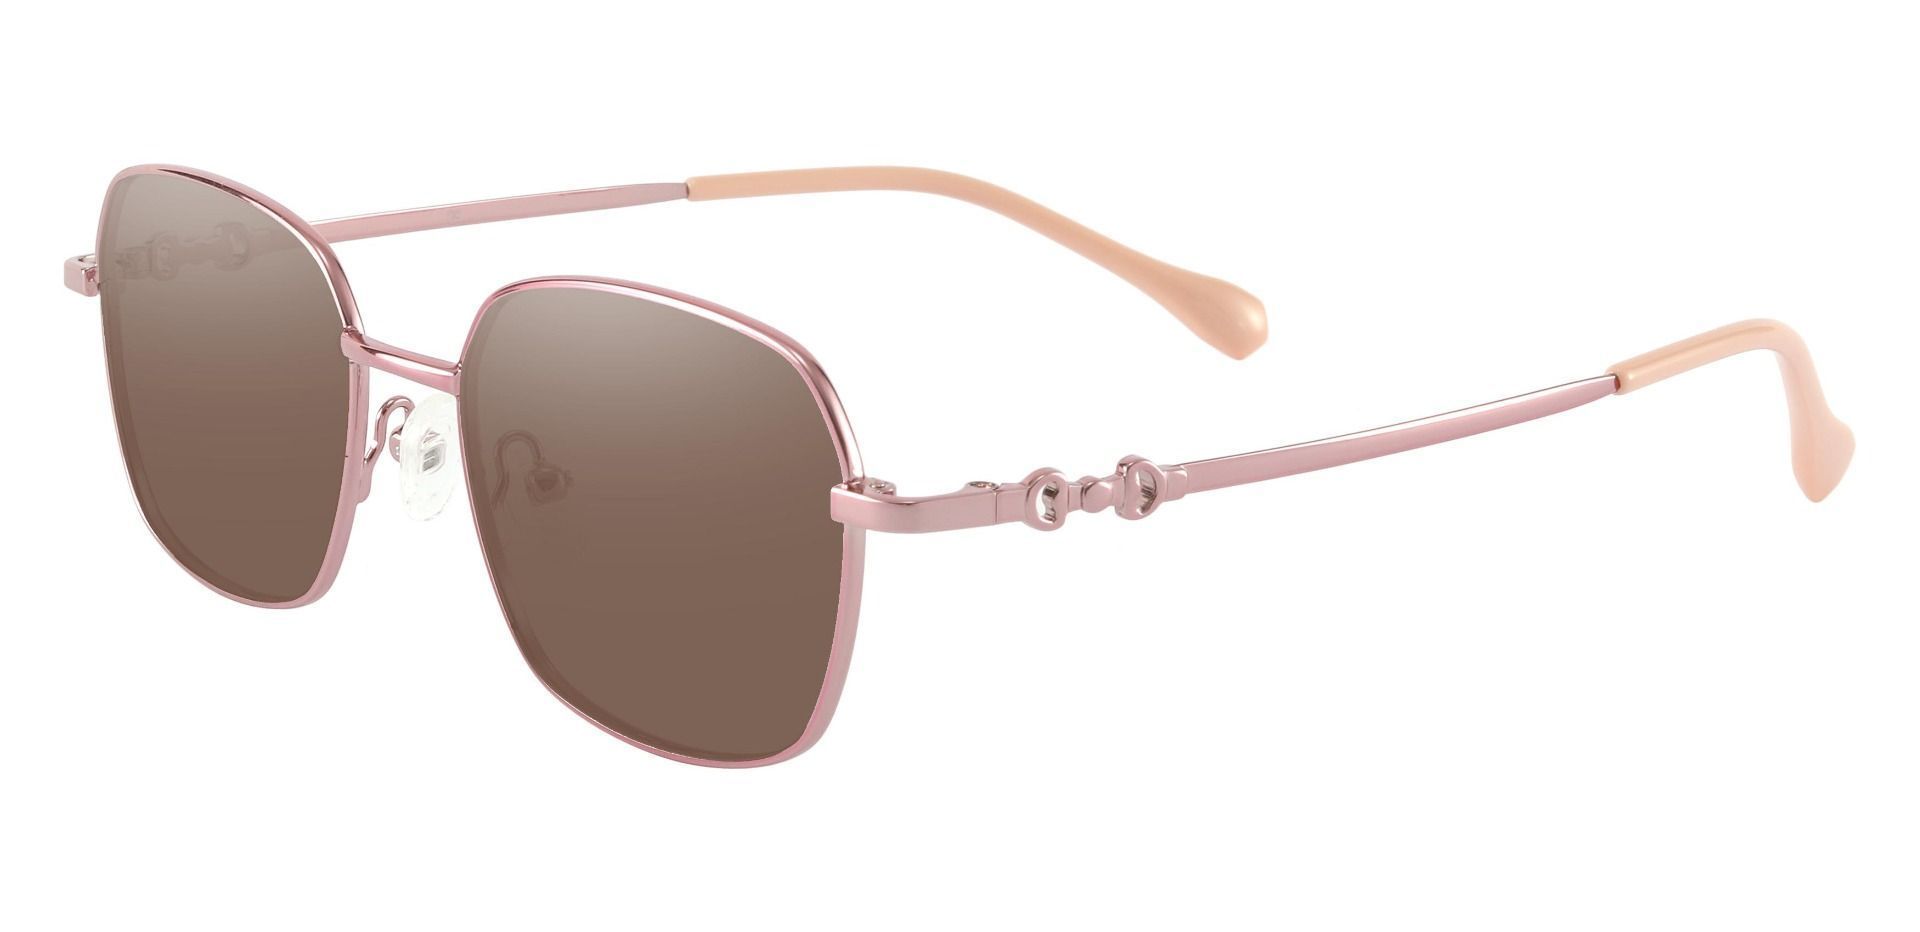 Averill Geometric Non-Rx Sunglasses - Rose Gold Frame With Brown Lenses